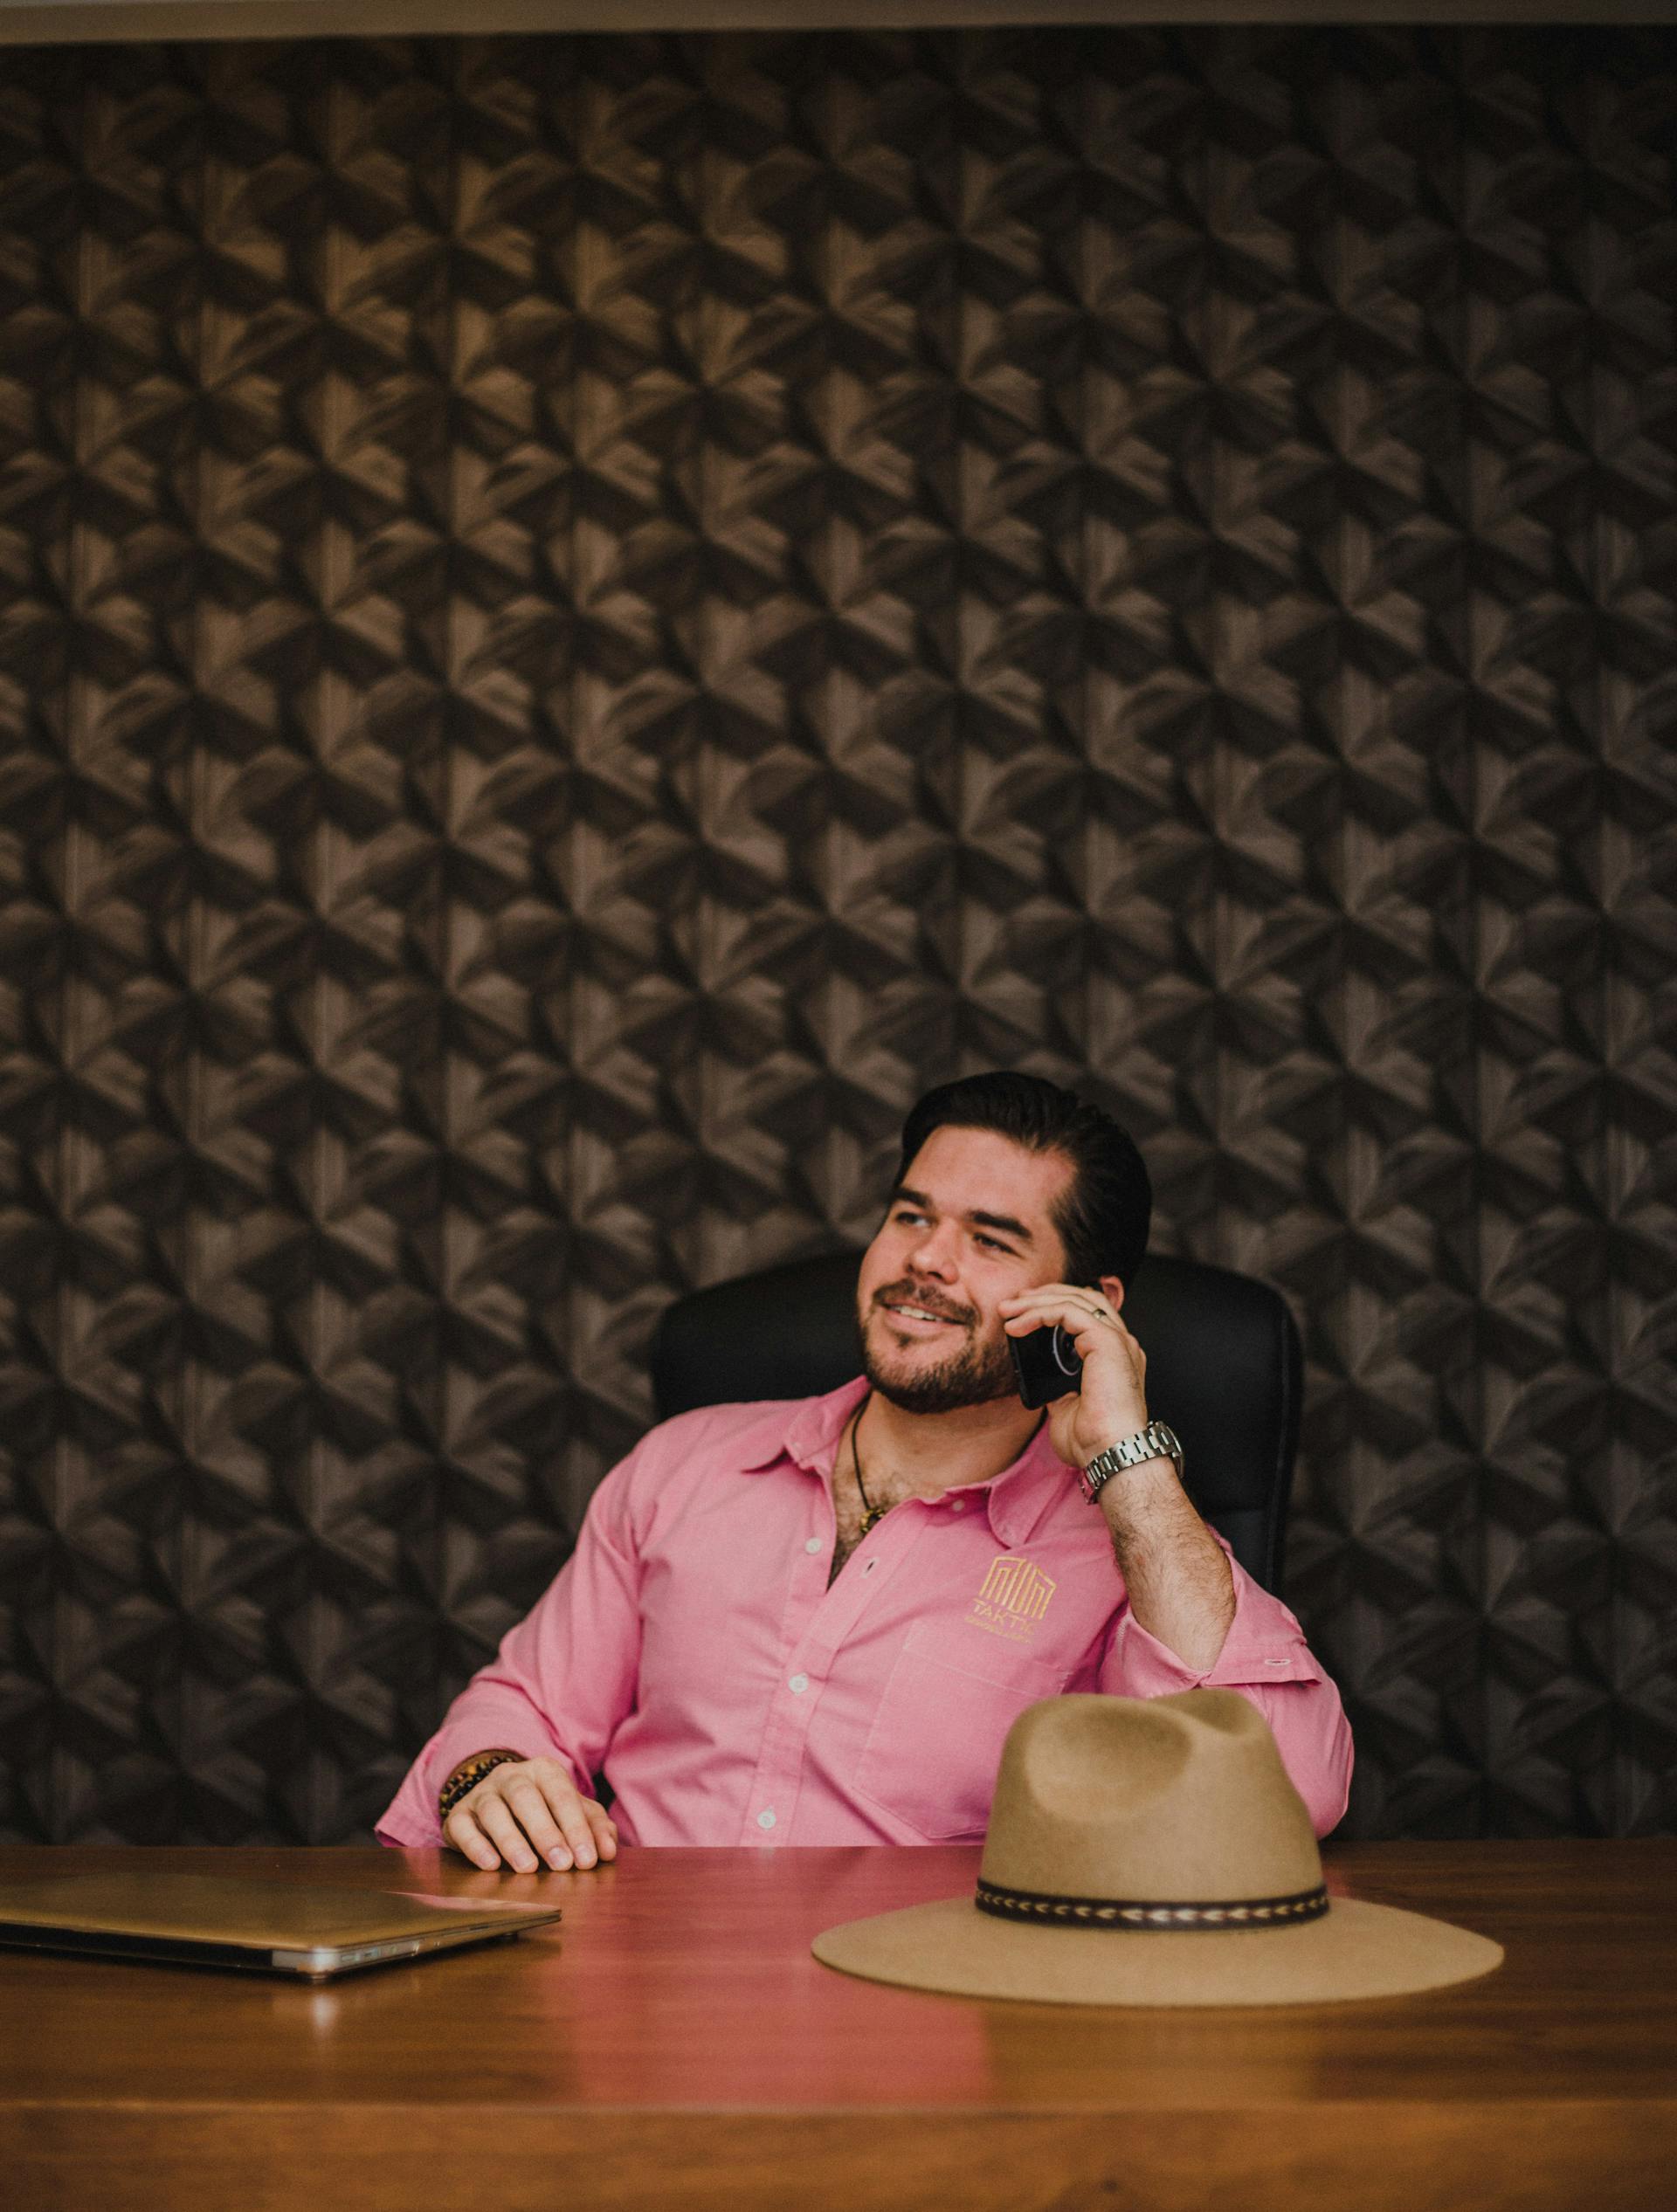 A smiling businessman talking on his phone | Source: Pexels